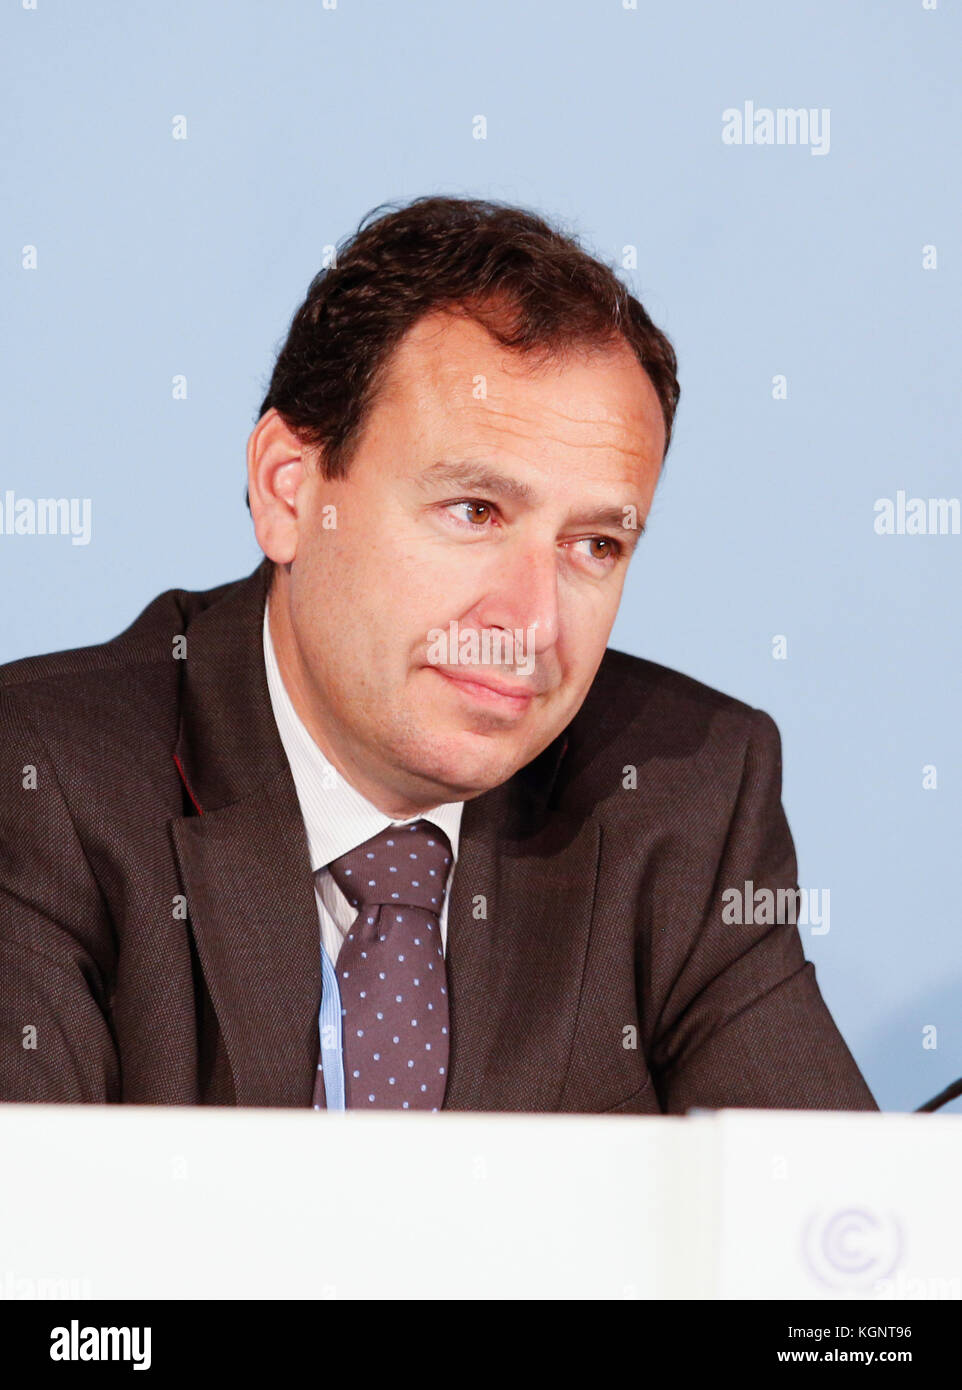 Bonn, Germany. 10th Nov, 2017. Augustin Delgado at the COP23 Fiji conference in Bonn, Germany on the 10th of November 2017. COP23 if organized by UN Framework Convention for Climate Change. Fiji holds presidency over this meeting in Bonn. Credit: Dominika Zarzycka/Alamy Live News Stock Photo